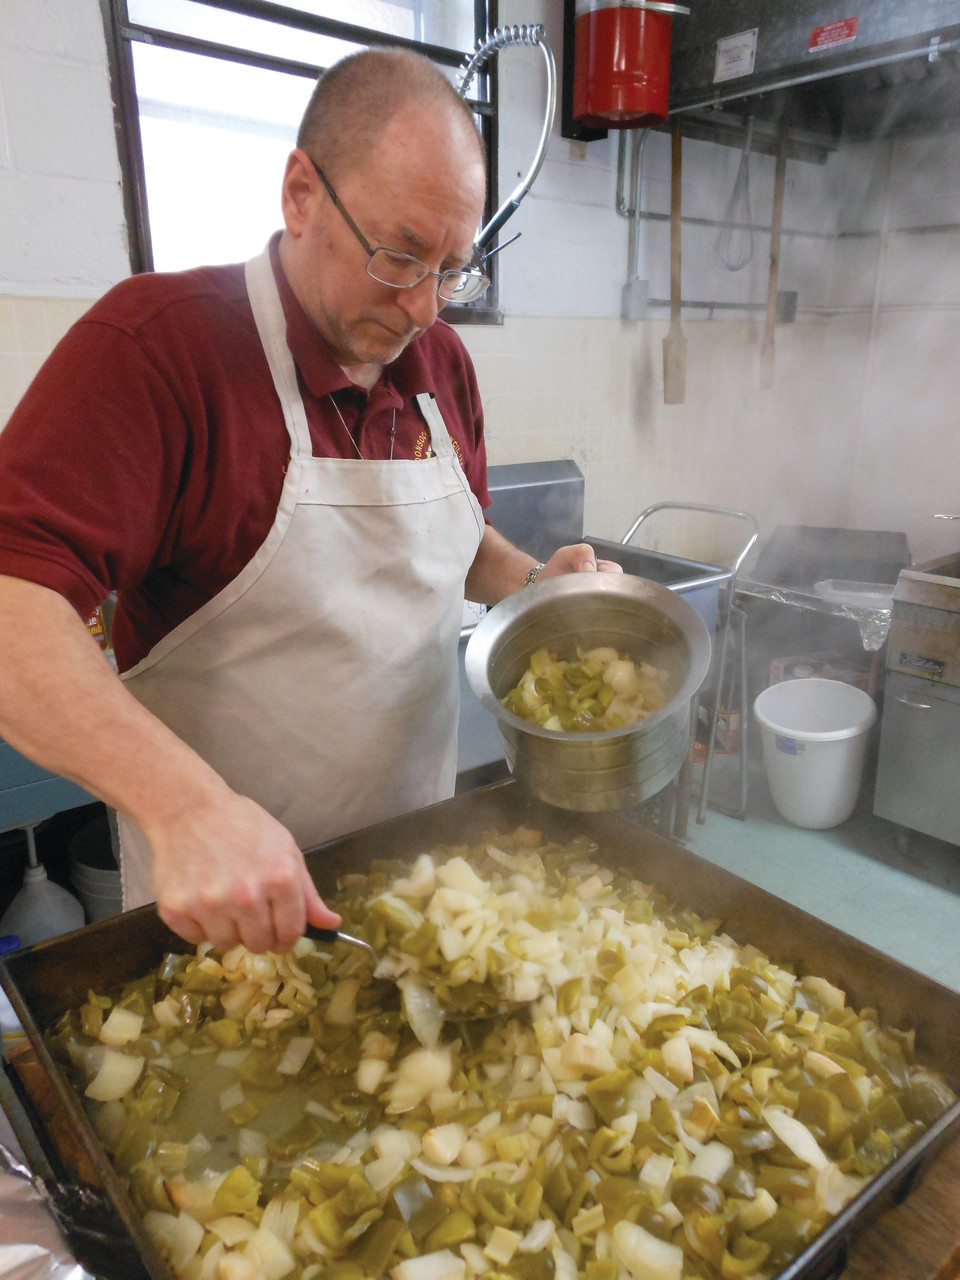 Jack Tracy, a member of the Knights of Columbus Woonsocket Council, prepares the peppers, onions and celery for a batch of dynamites. The Knights of Columbus have held an annual dynamite fundraiser to benefit youth ministry in the Diocese of Providence since 2012.